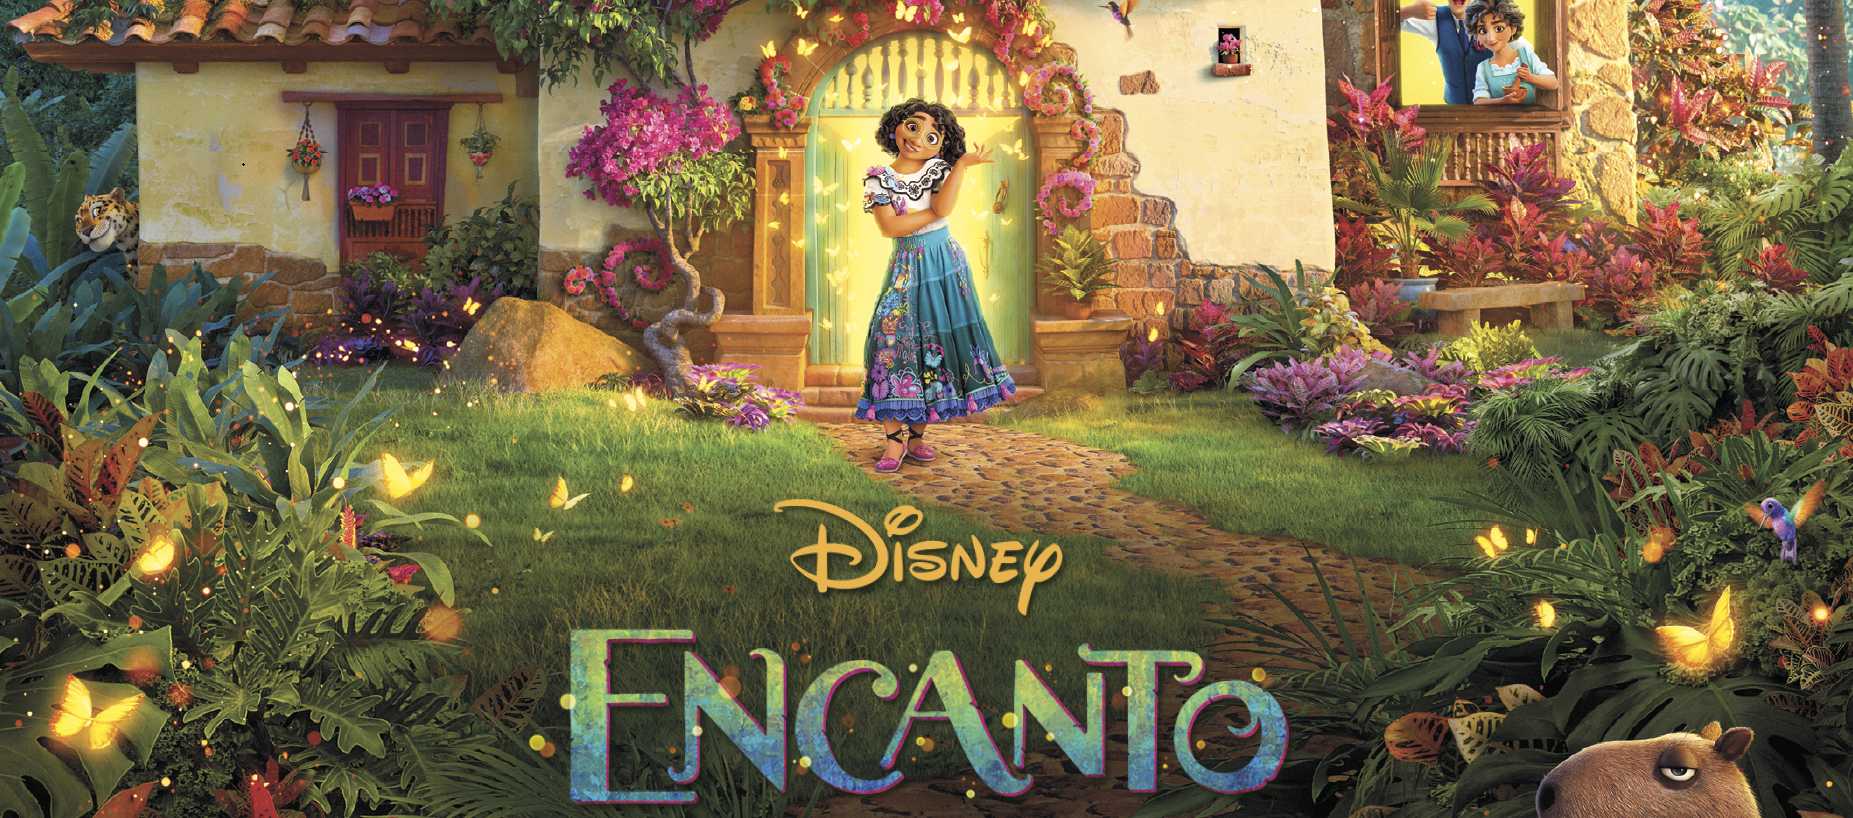 Disney’s Encanto in Theaters on November 24th!